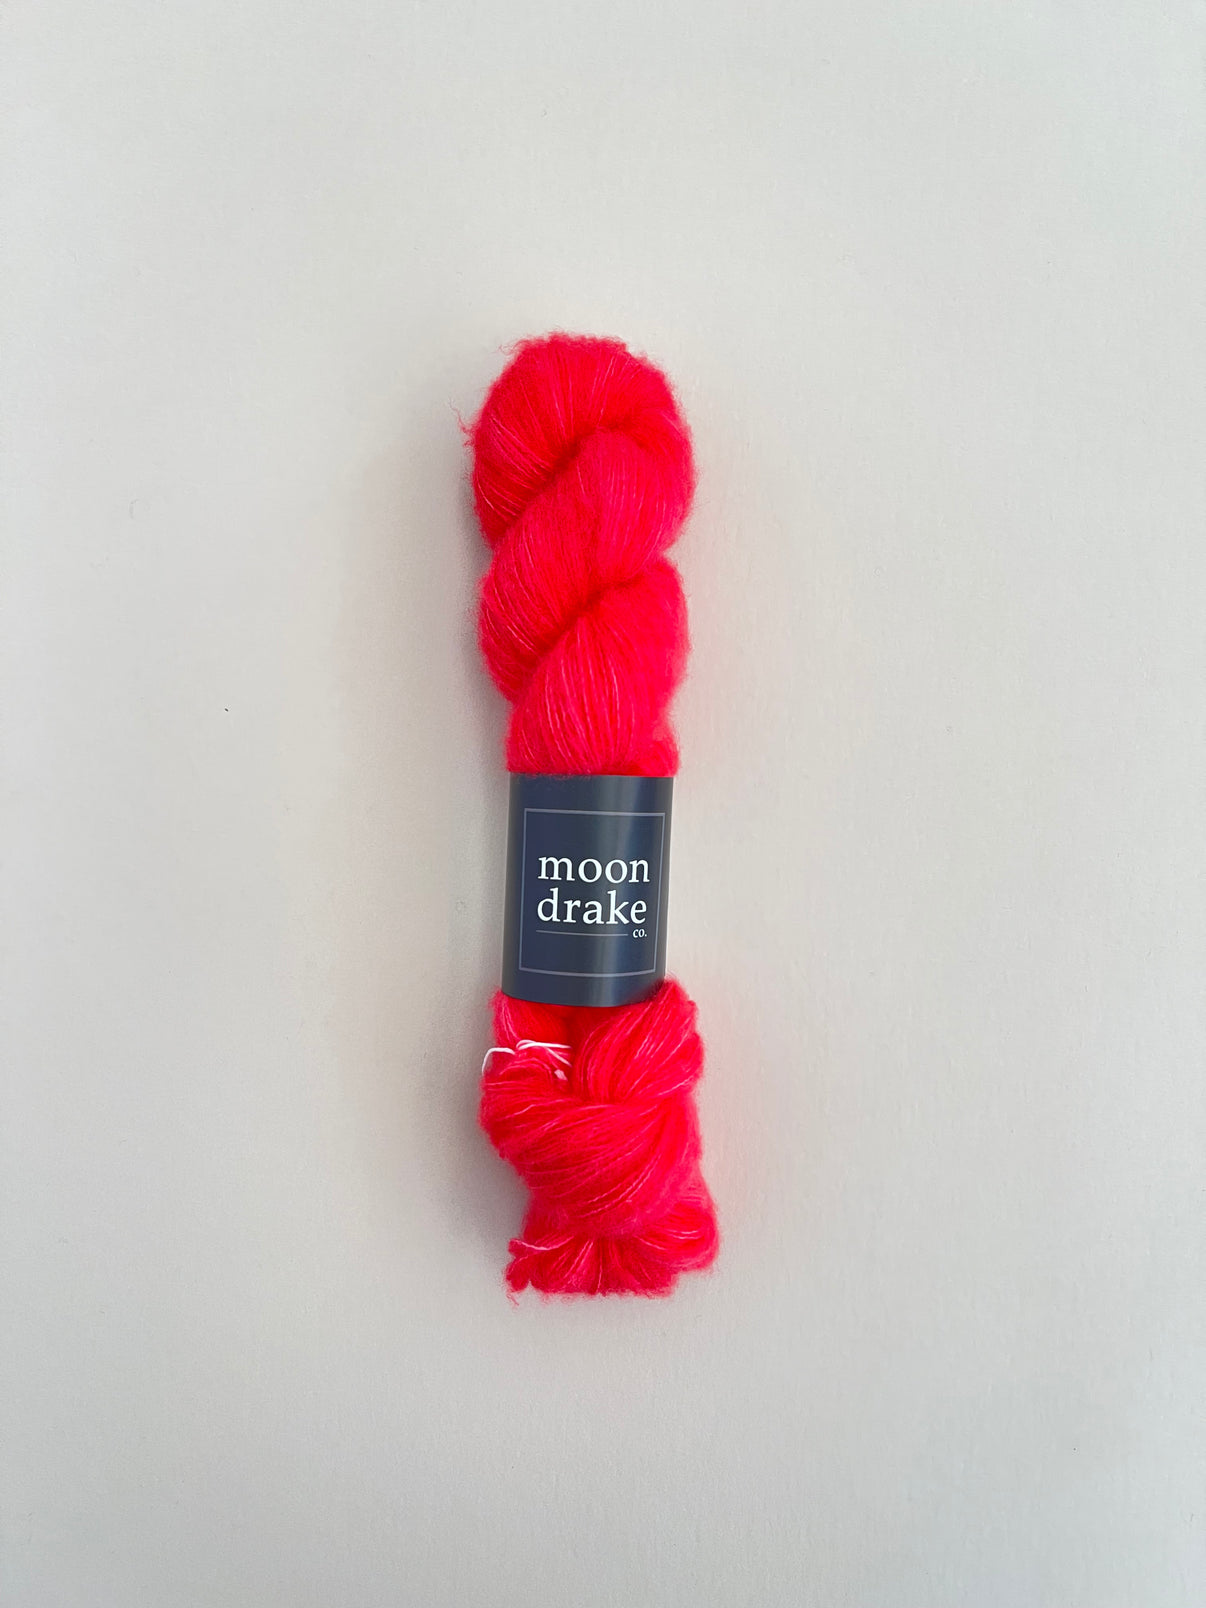 A very bright coral colored skein of yarn with a black label that reads "Moondrake Co". The yarn is very fluffy and floofy.